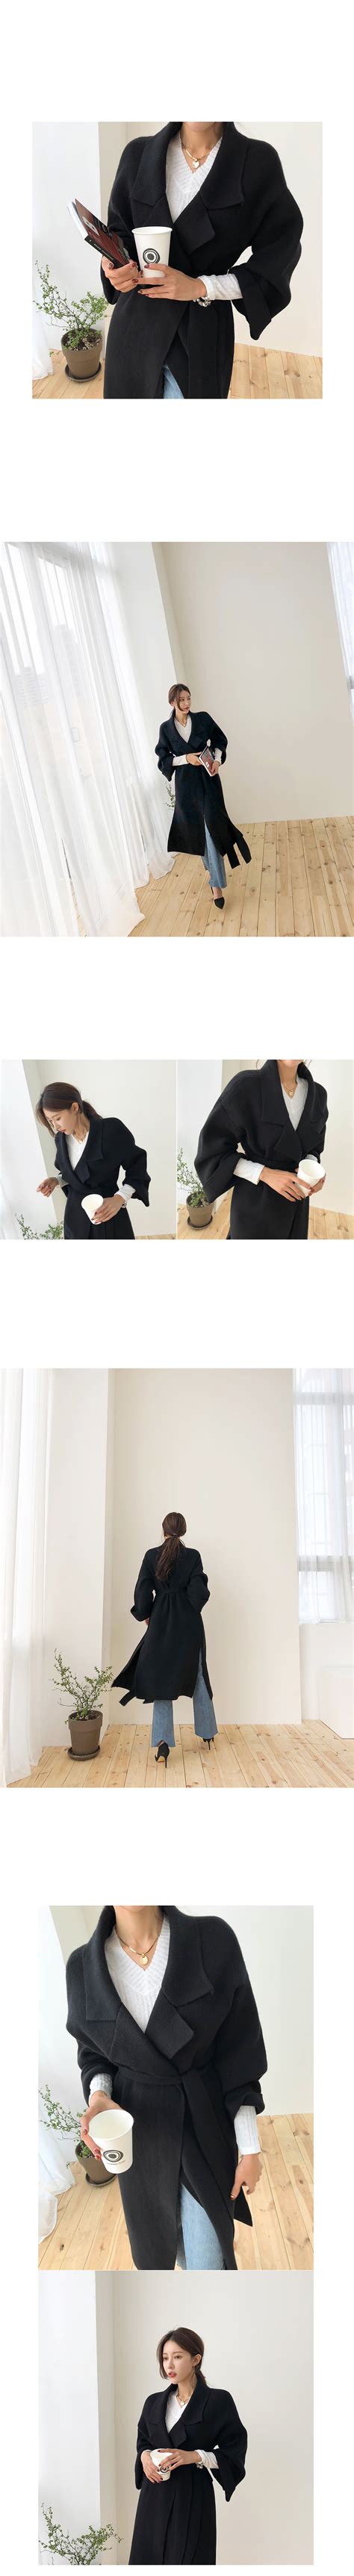 Notch Collar Self Tie Long Cardigan DABAGIRL Your Style Maker Korean Fashions Clothes